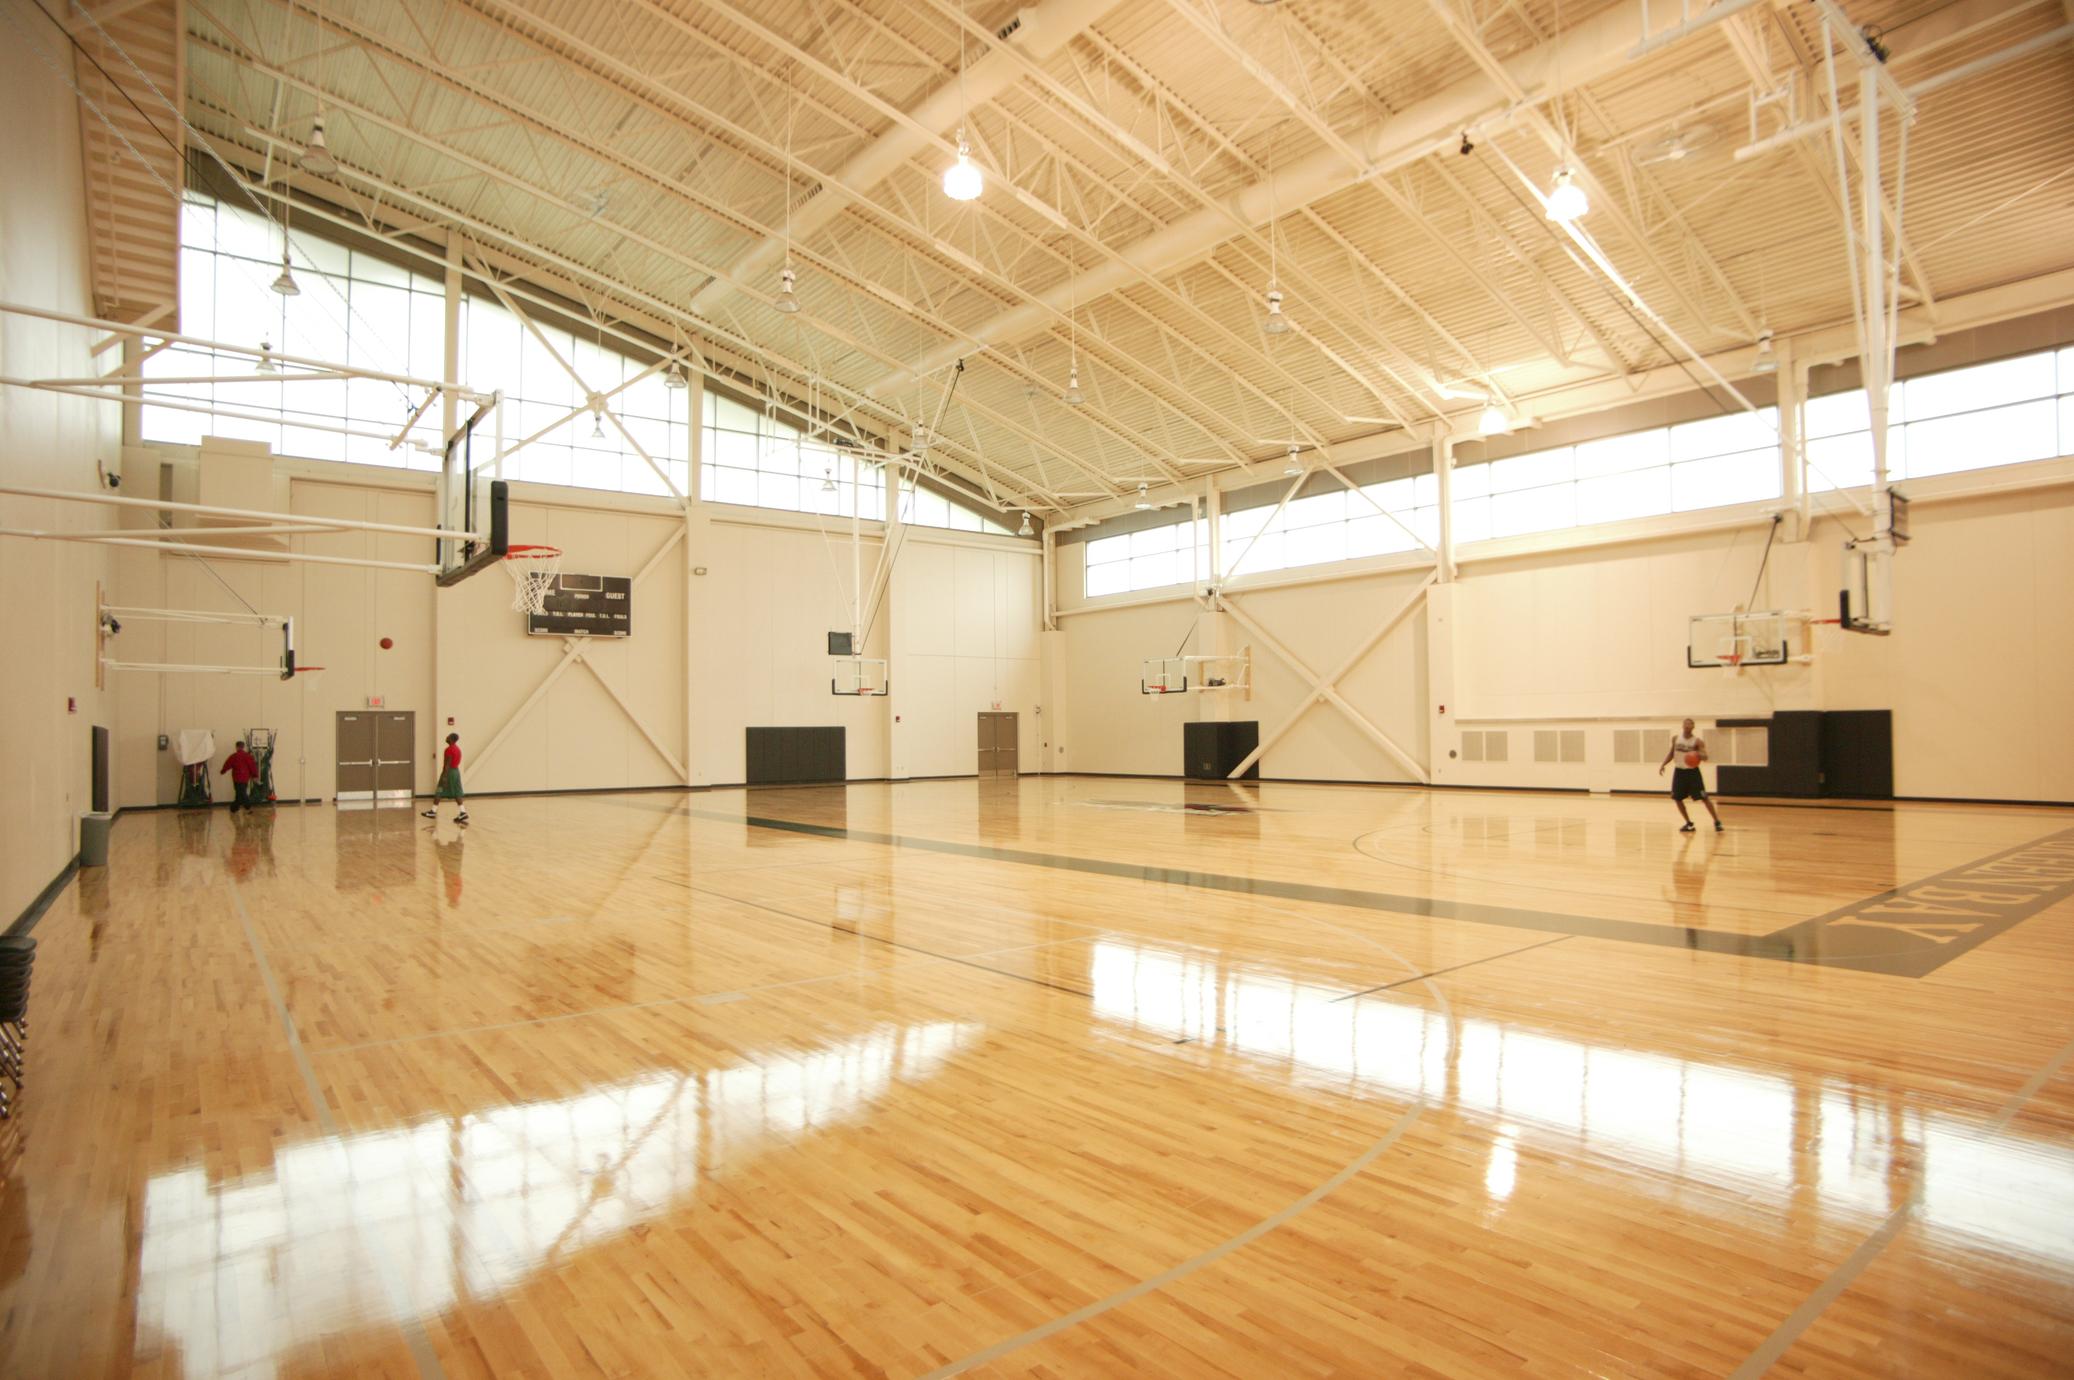 Gymnasium at the Kress Events Center